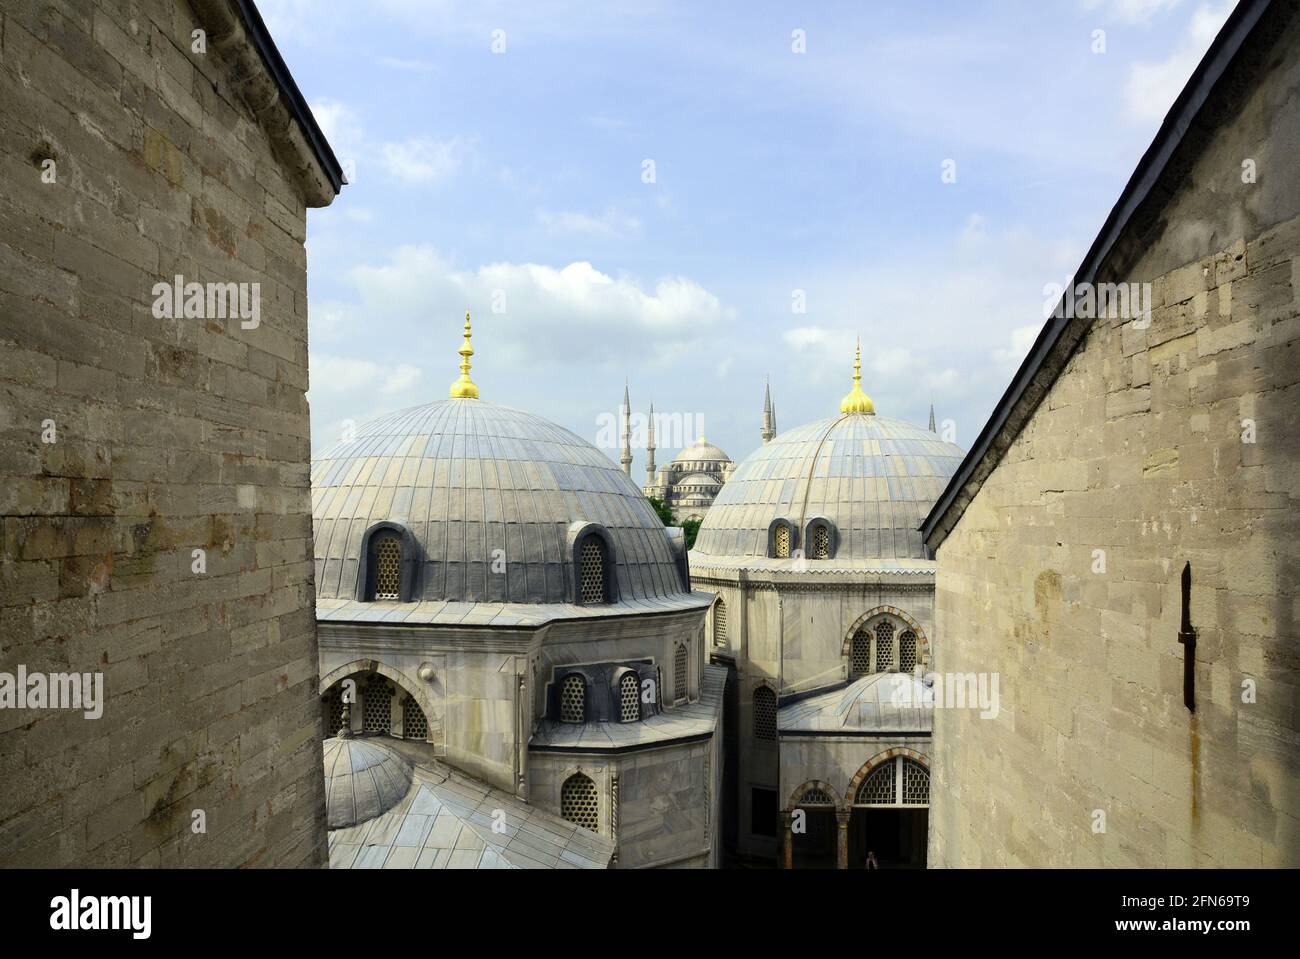 View from Hagia Sophia looking over the domed buildings to the Blue mosque in the distance. Classic view of Istanbul, Turkey. Stock Photo